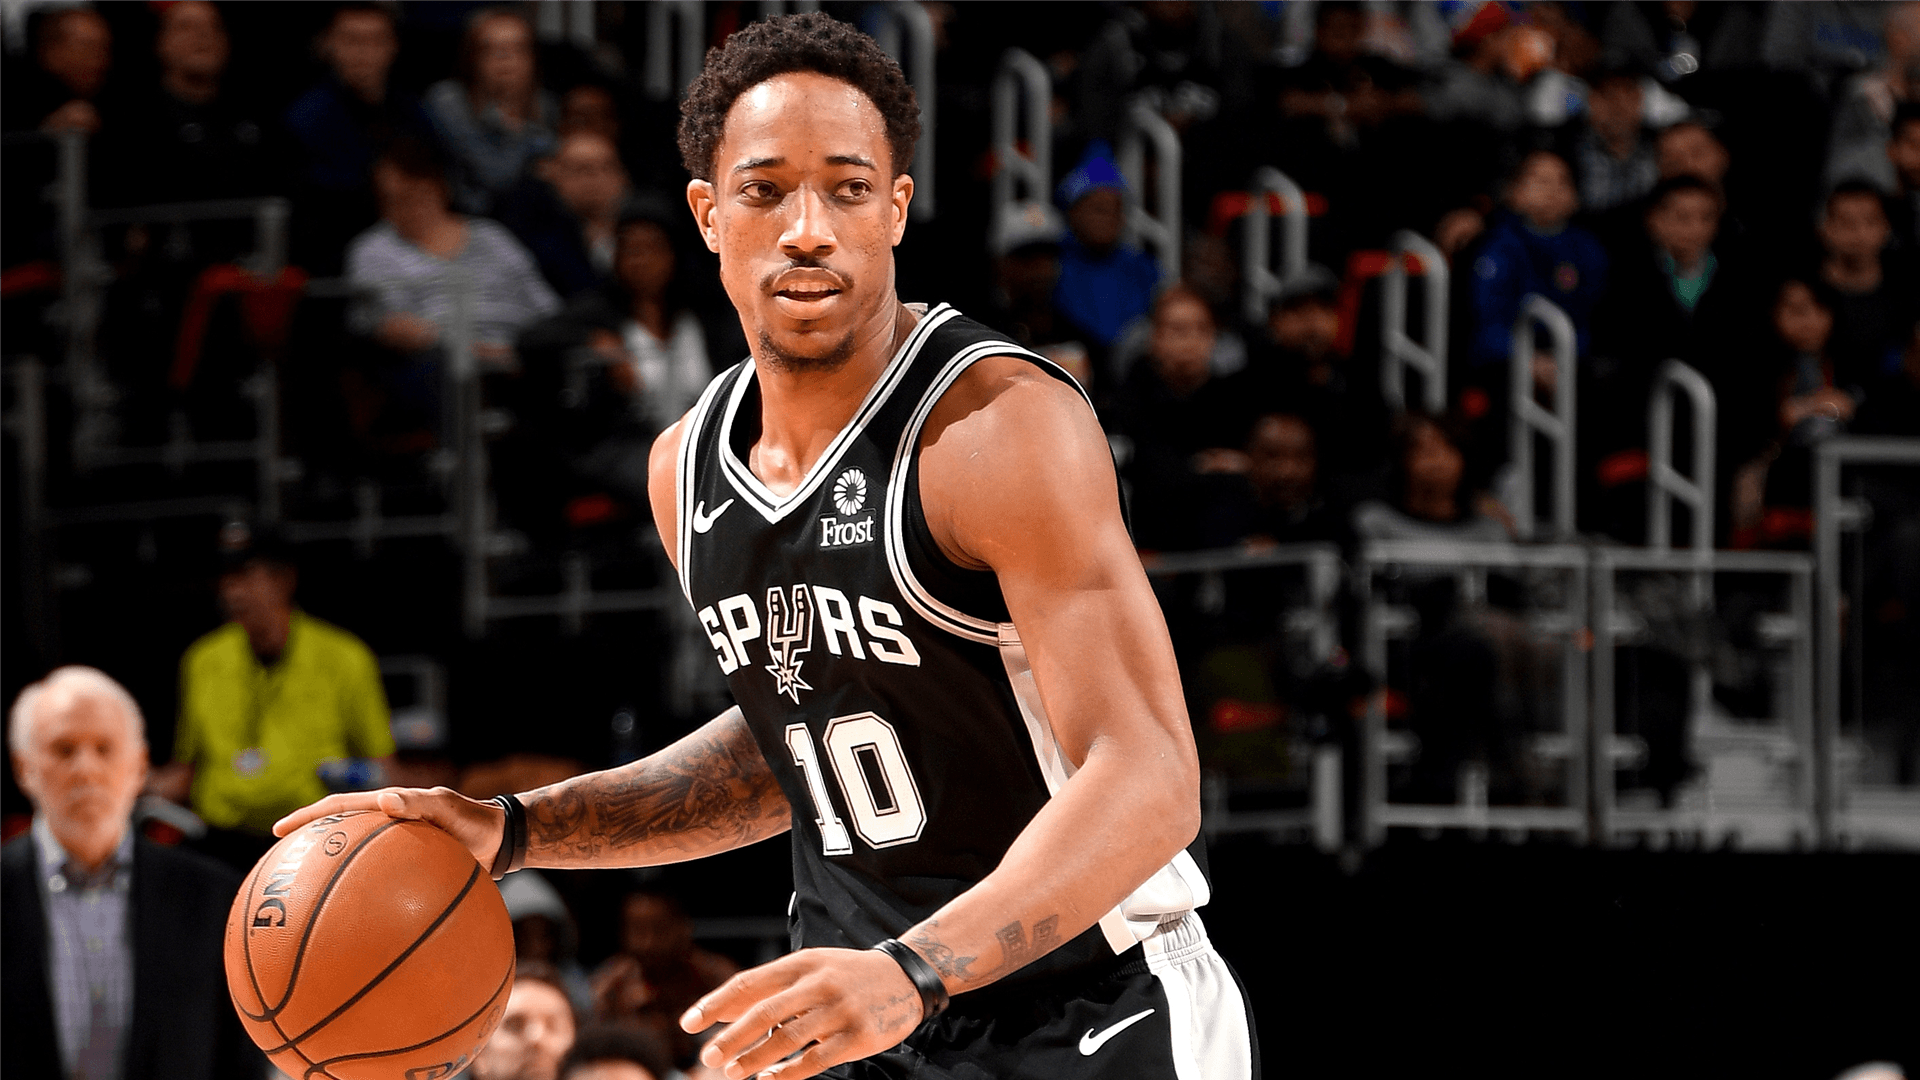 DeMar DeRozan and the San Antonio Spurs are the NBA's hottest team